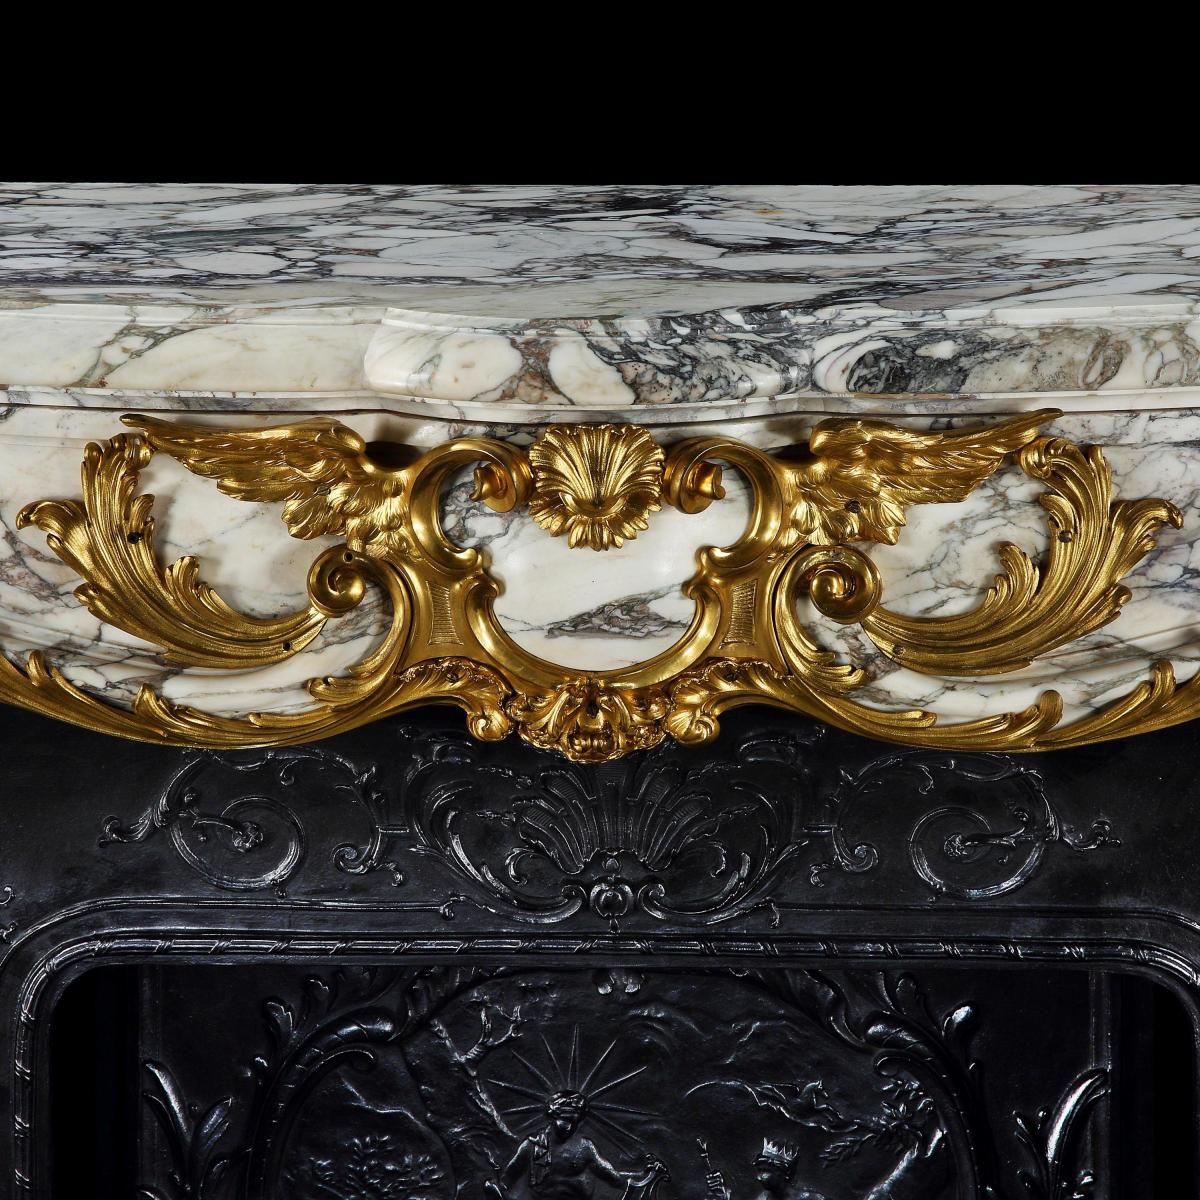 Brèche Violette Fireplace In the Louis XV Manner